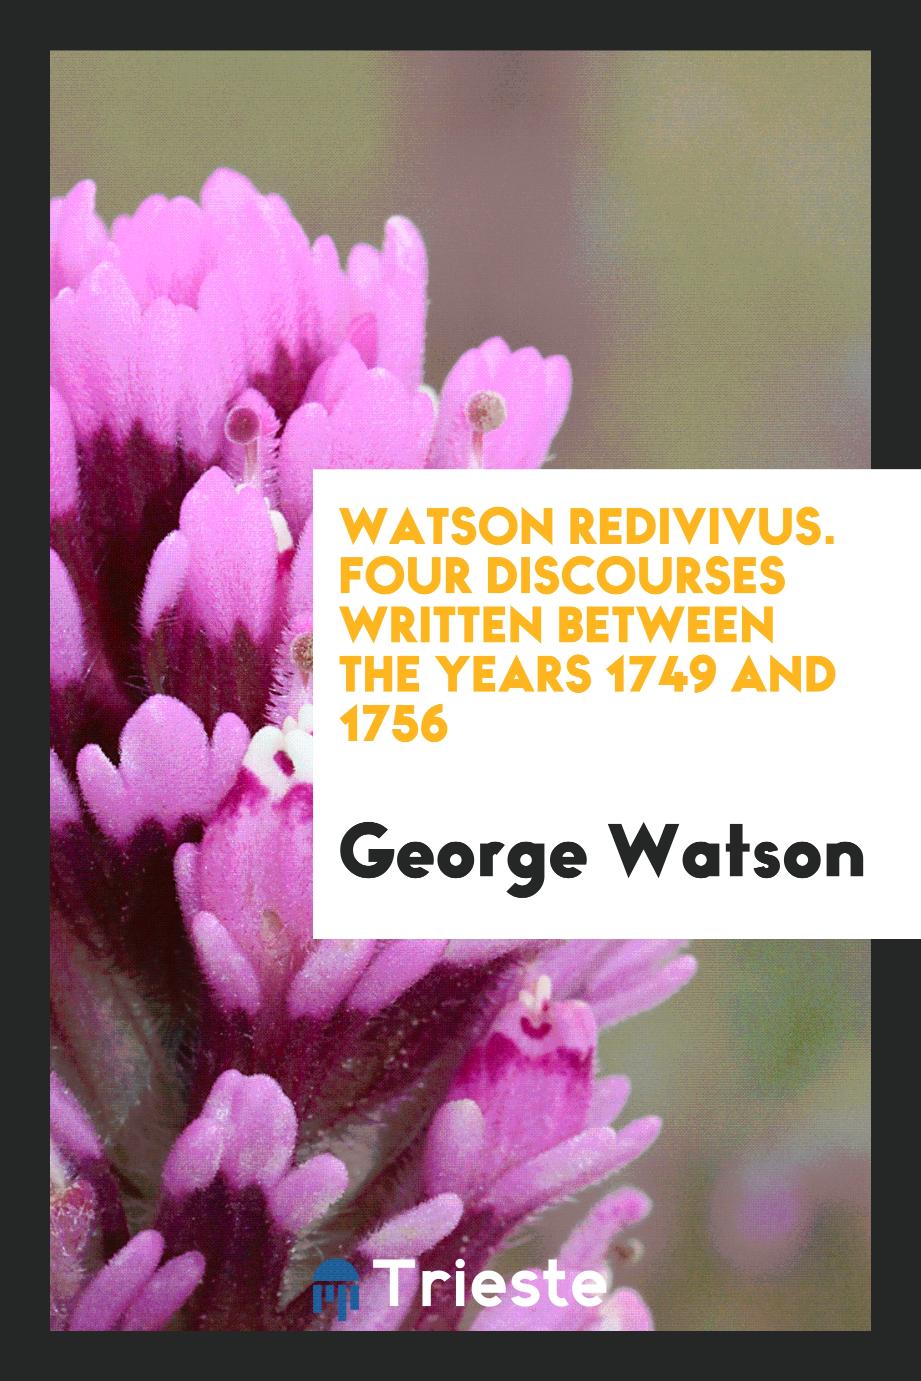 Watson redivivus. Four discourses written between the years 1749 and 1756